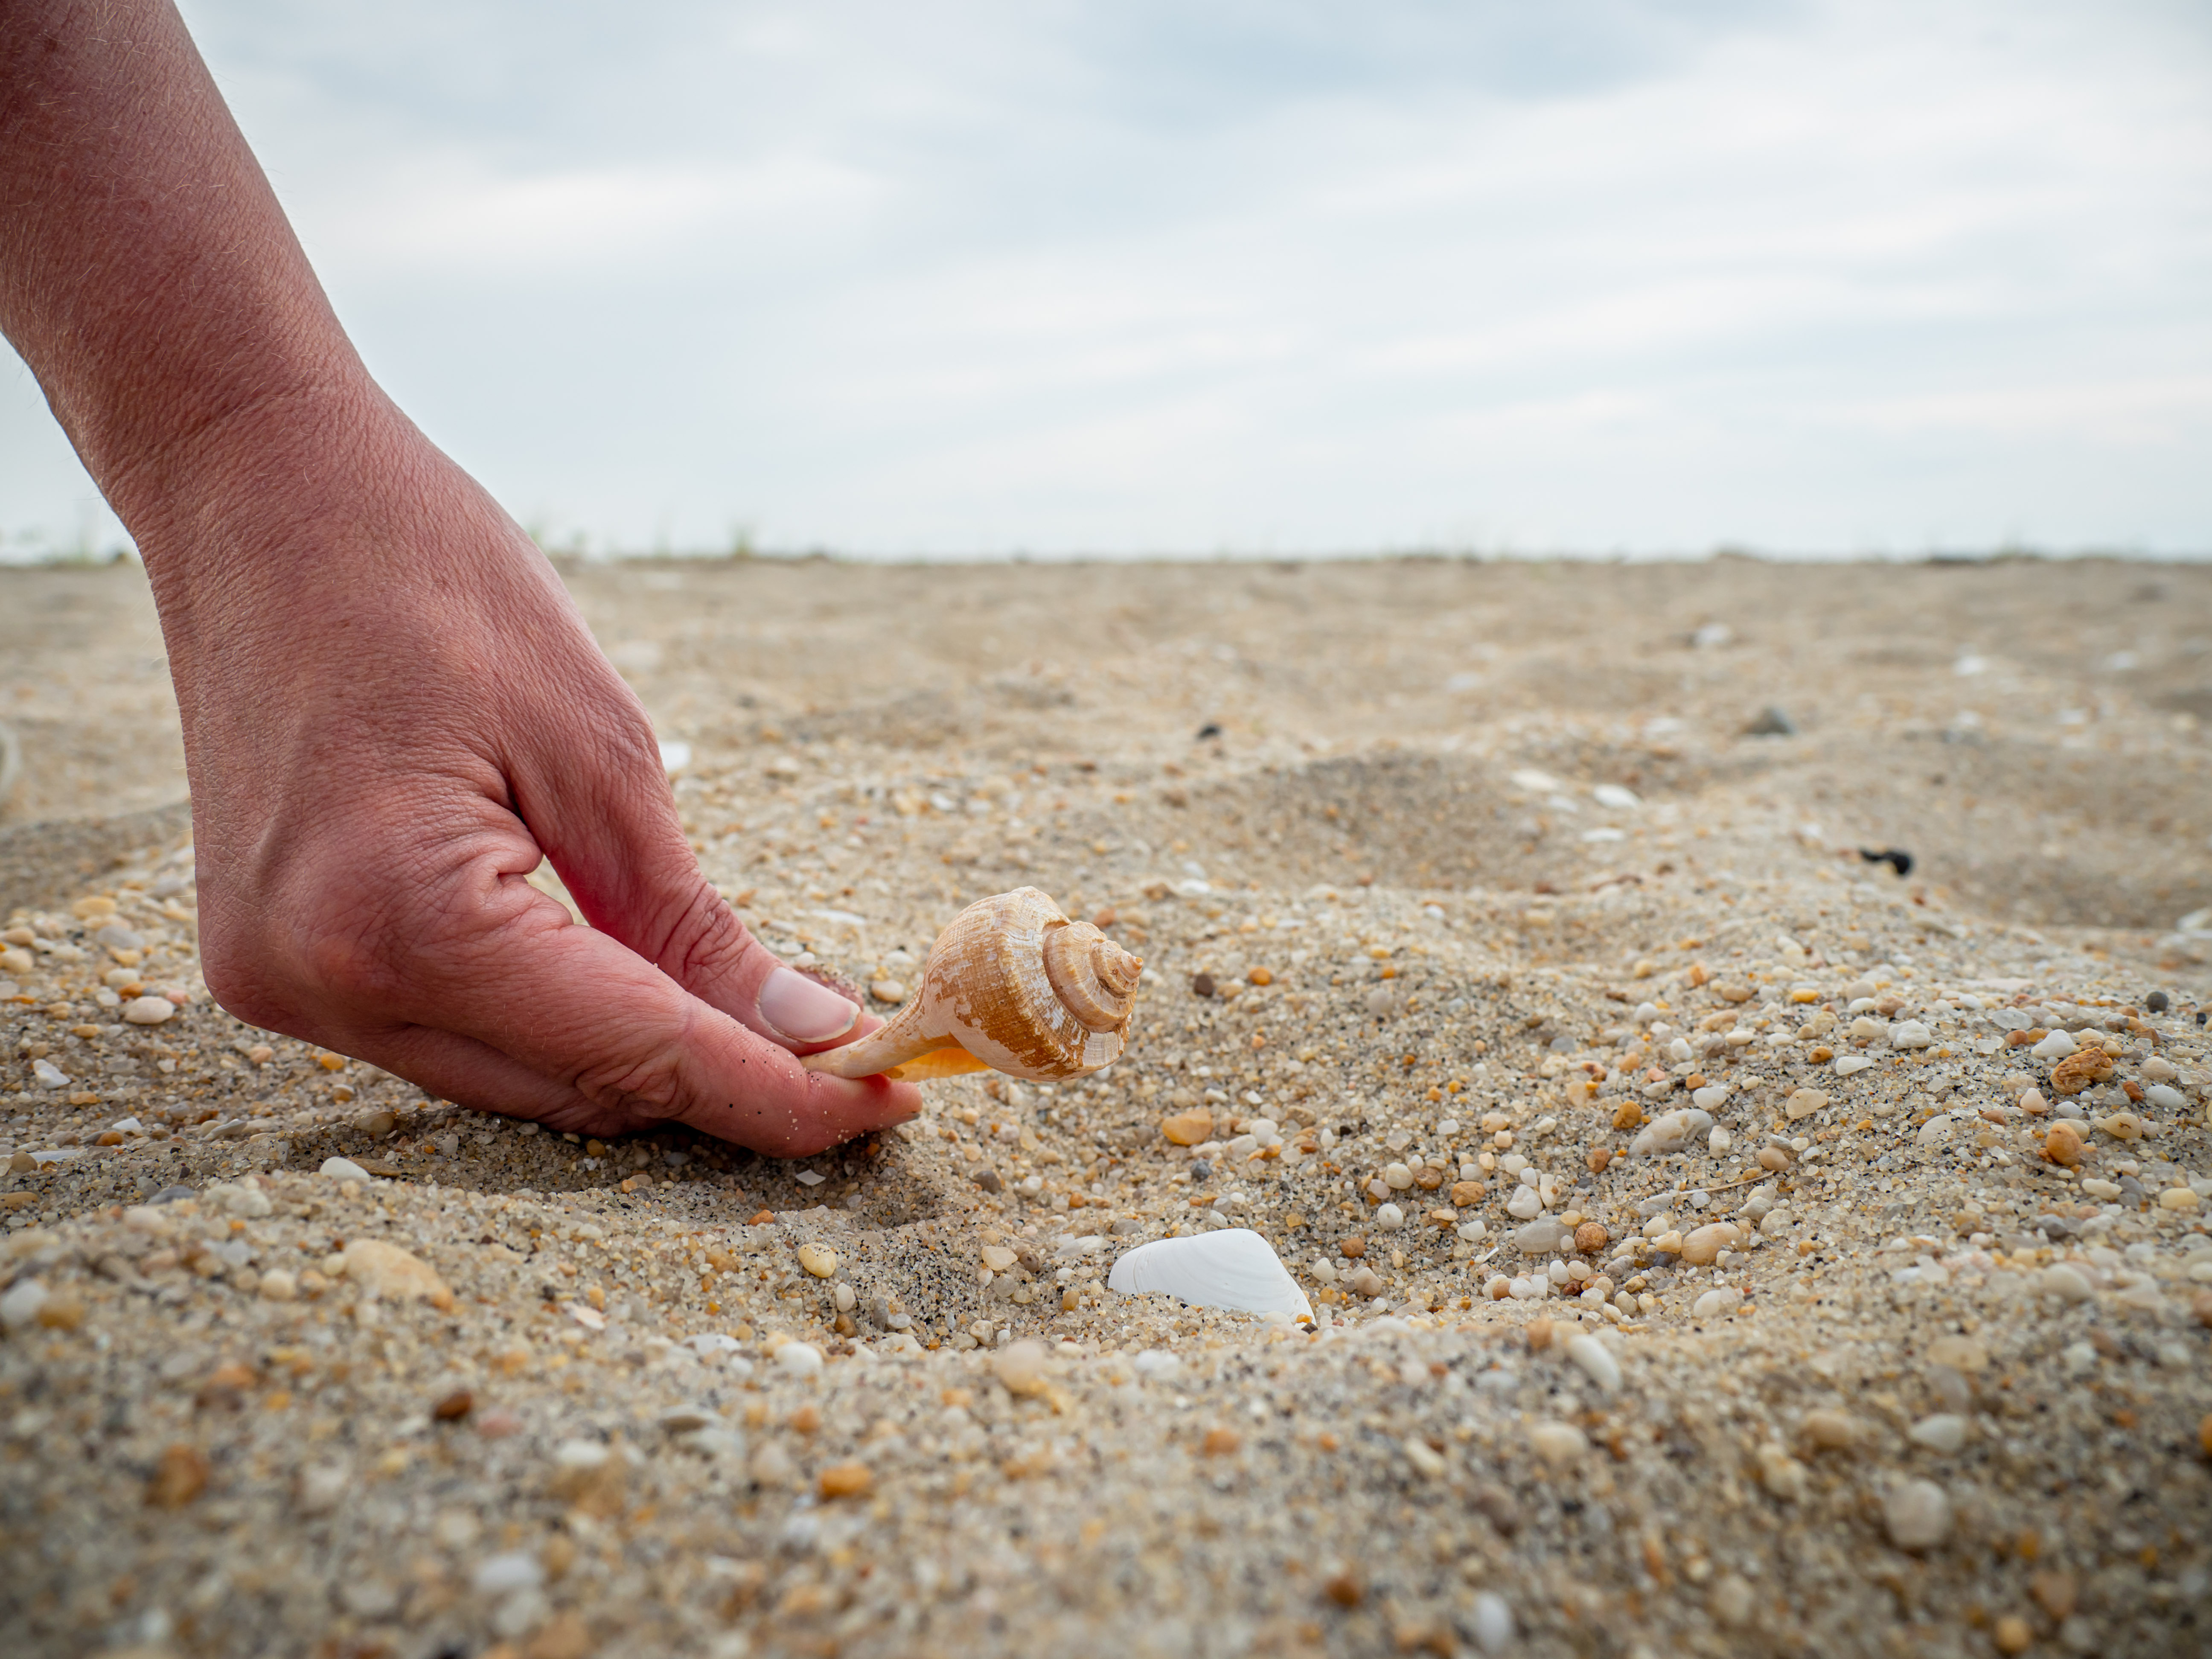 Seashells expert guide: what are they, where do they come from